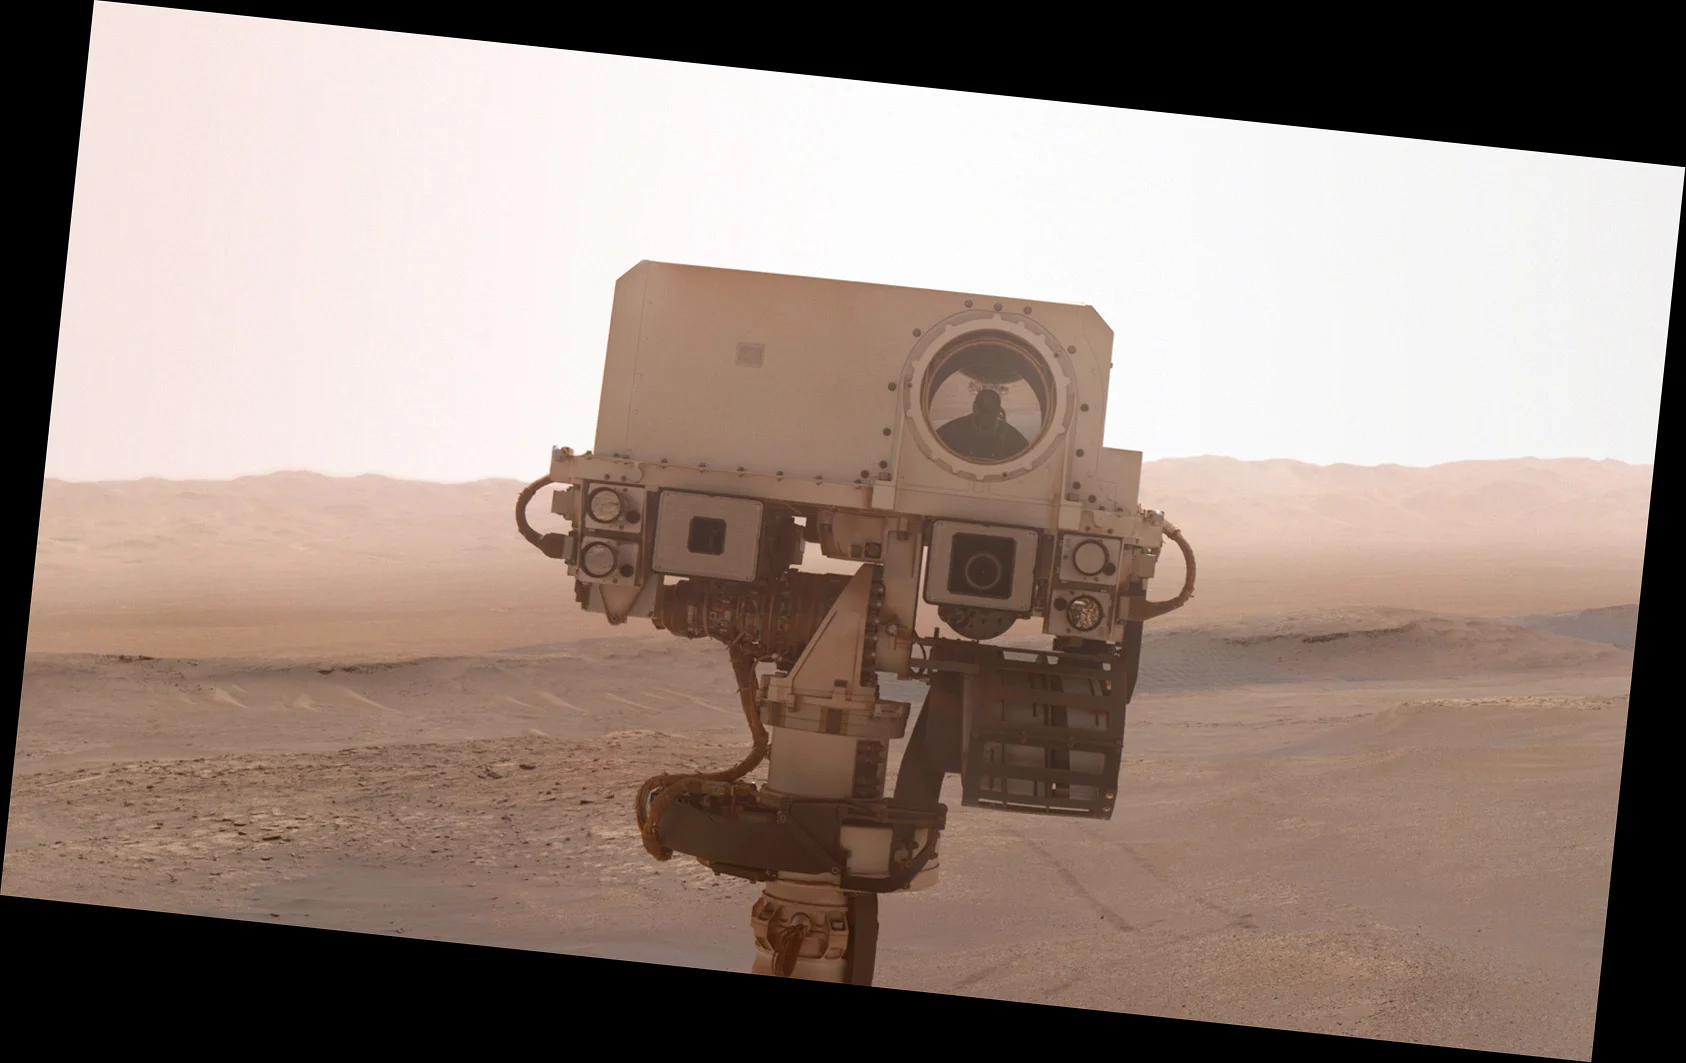 There's rare chemistry in Curiosity rover's new Mars selfie